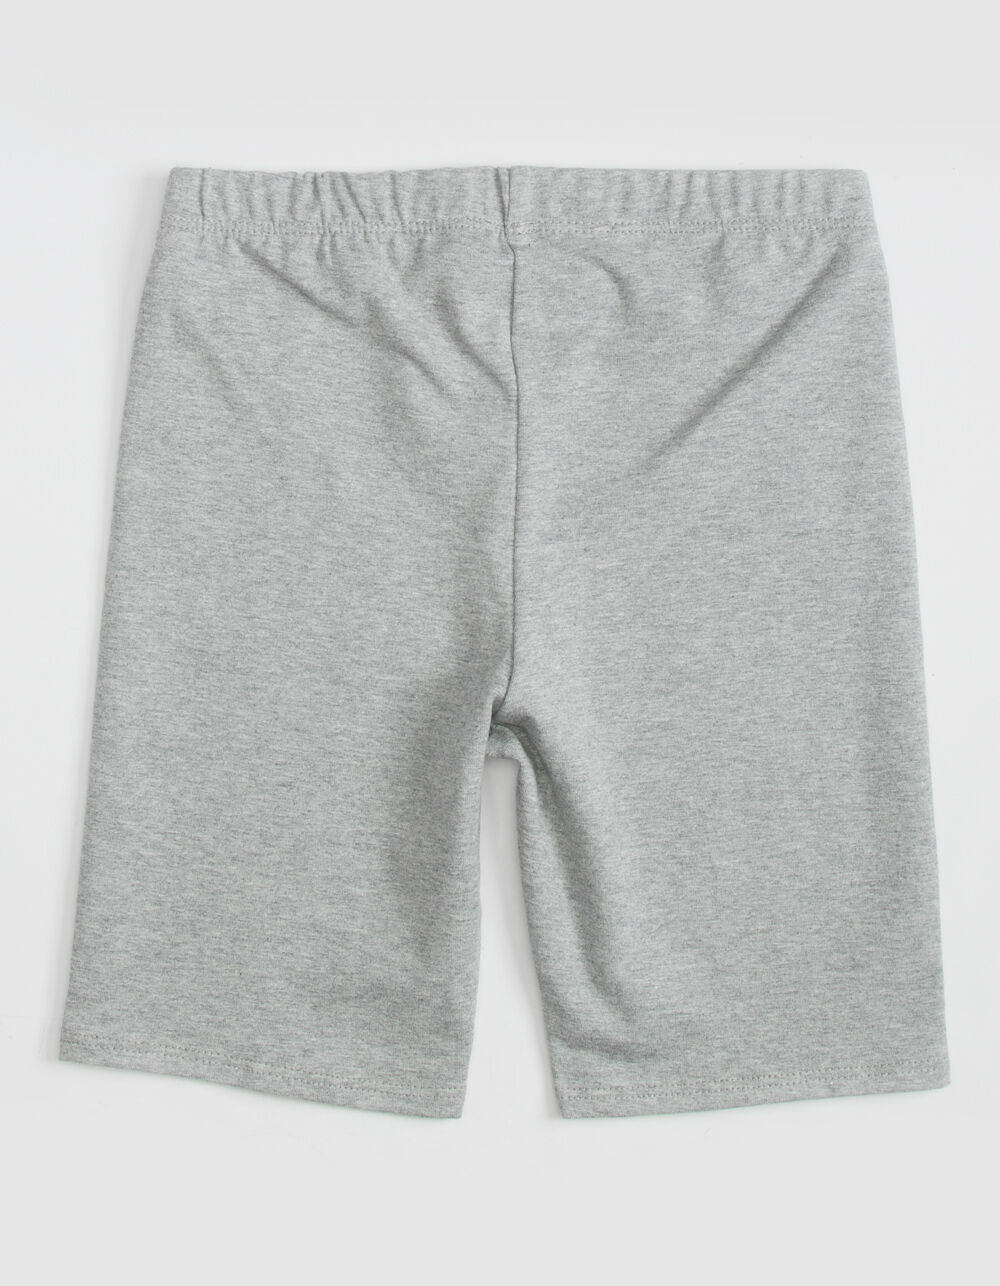 WHITE FAWN Solid Girls Heather Gray Bike Shorts - HEATHER GRAY | Tillys